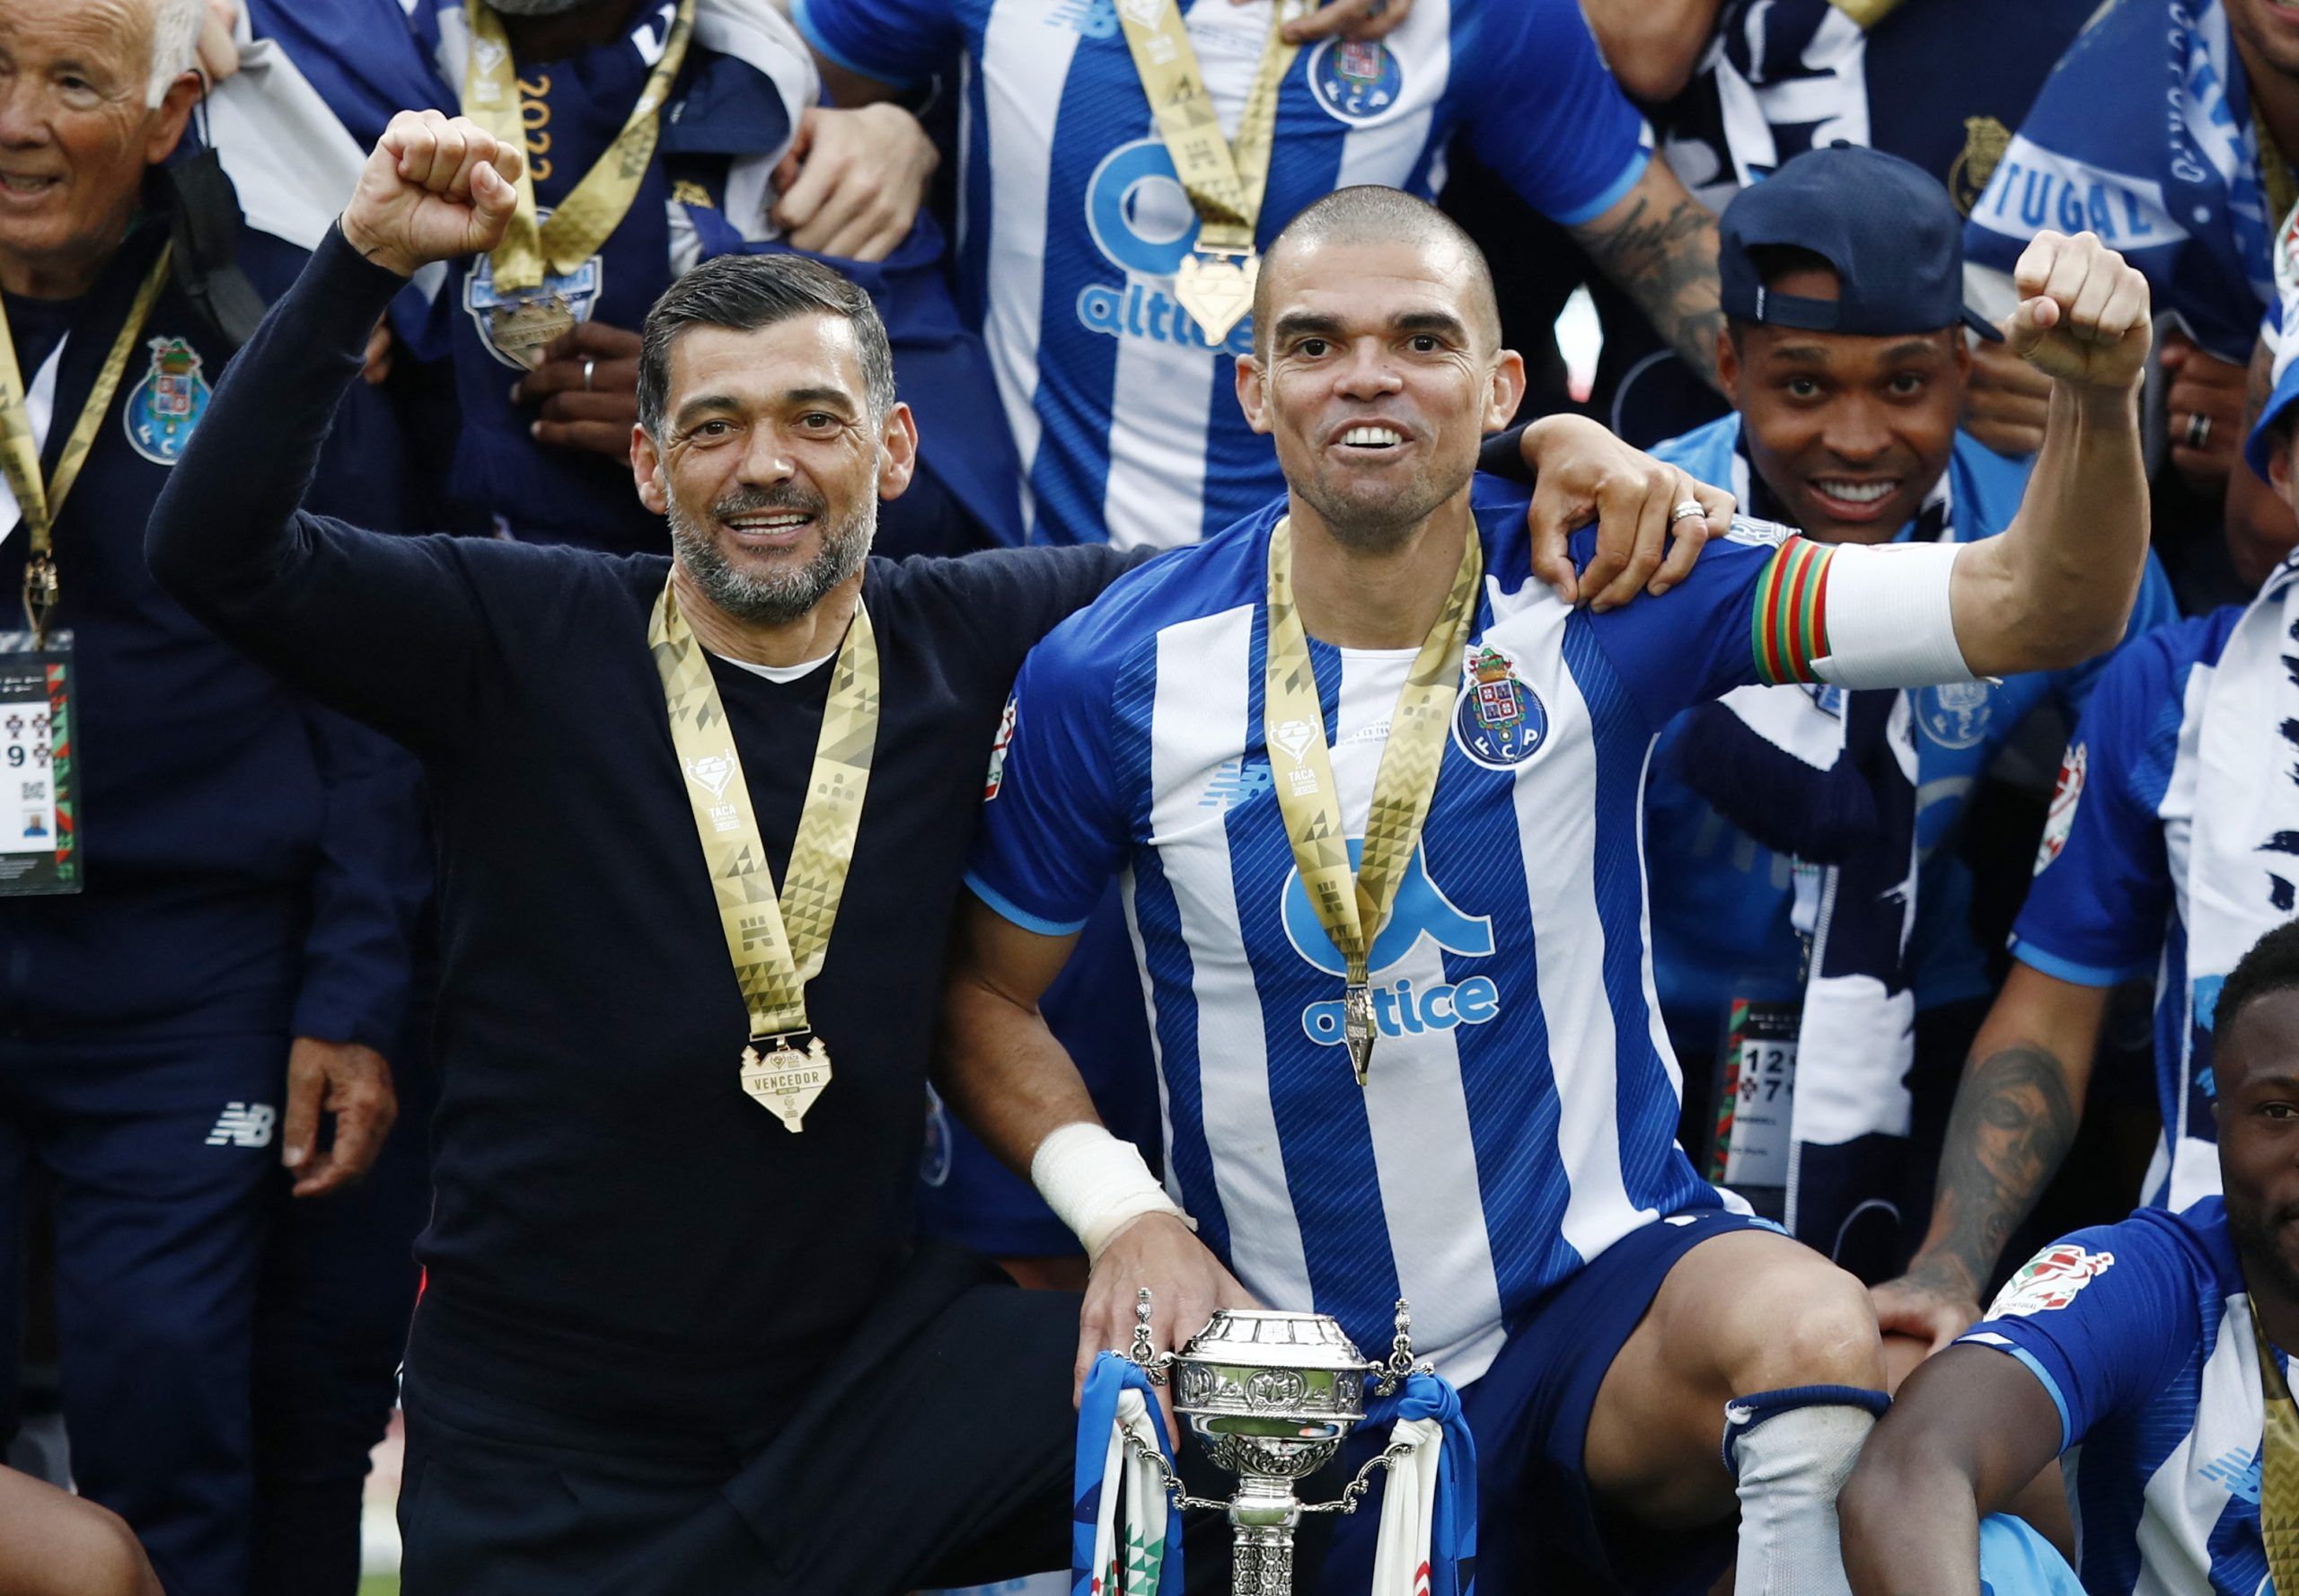 Soccer Football - Portugal Cup Final - FC Porto v Tondela - National Sports Center Jamor, Alges, Portugal - May 22, 2022 FC Porto's Pepe and Sergio Conceicao celebrate with the trophy after winning the Portugal Cup Final REUTERS/Pedro Nunes